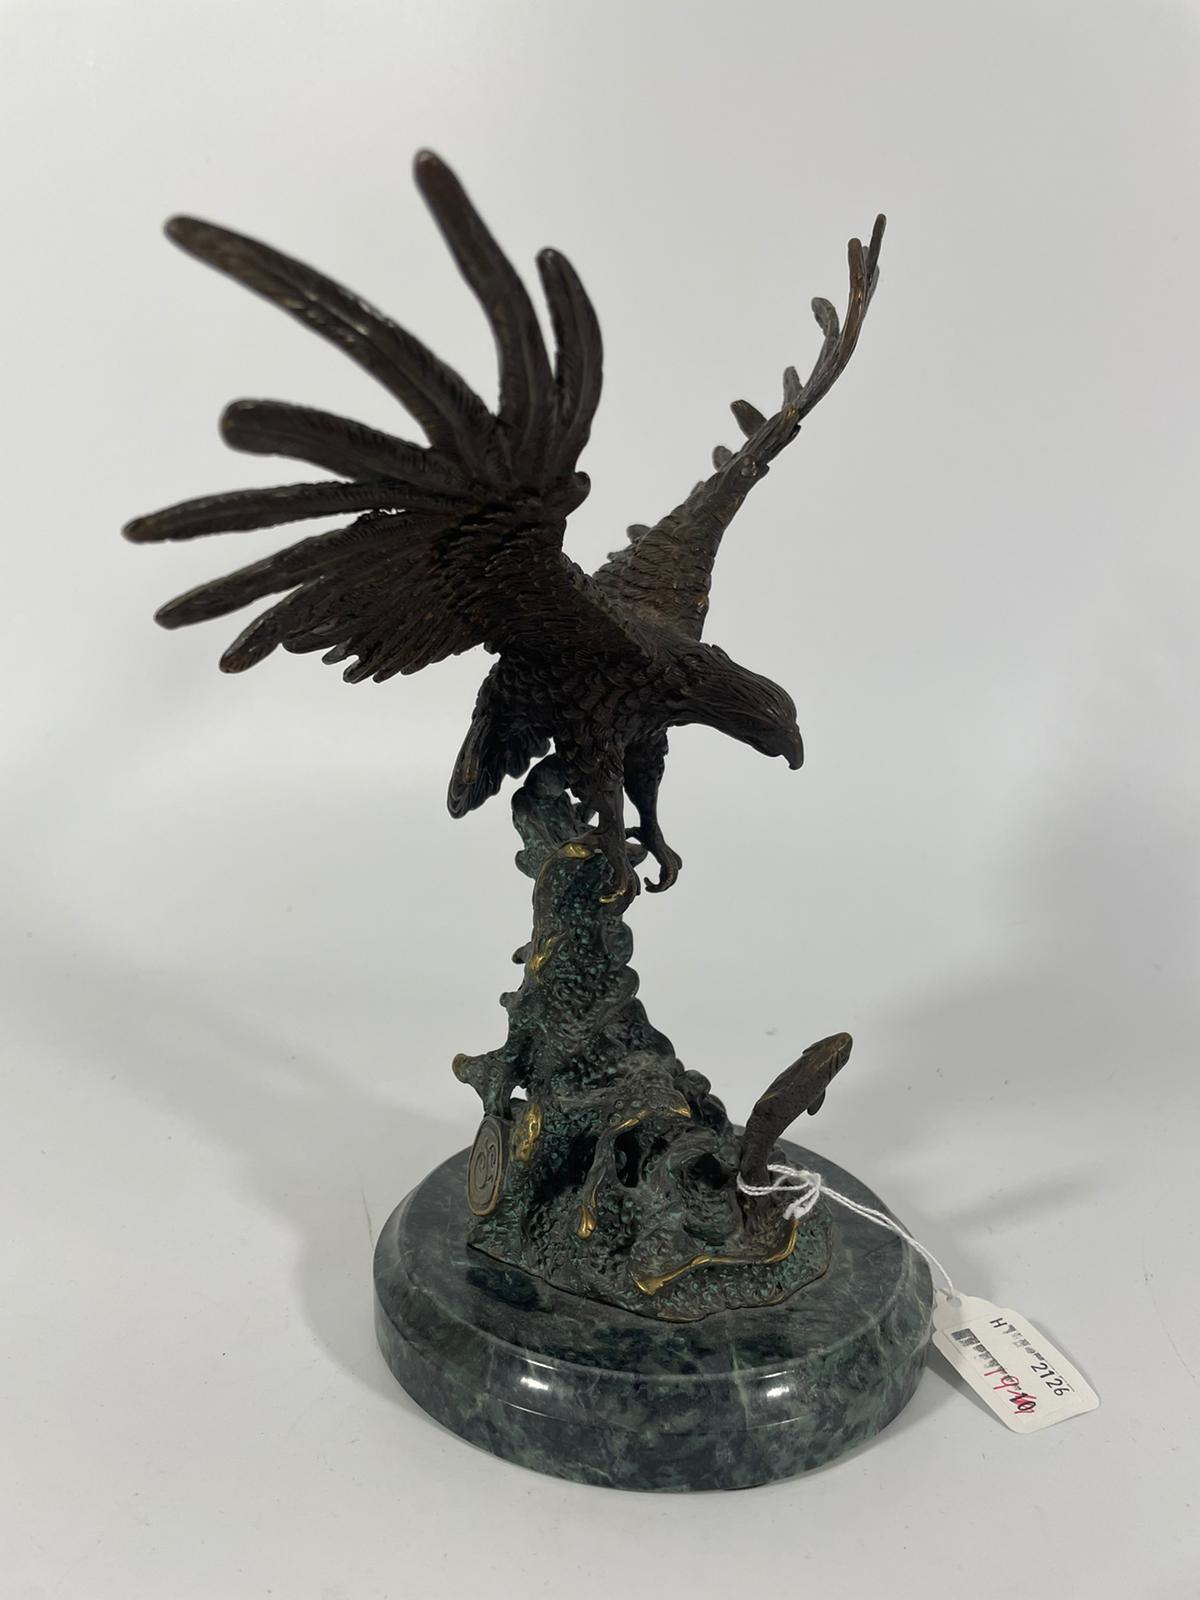 A bronze group of an eagle about to catch a leaping salmon. Approximately 25cm tall with good